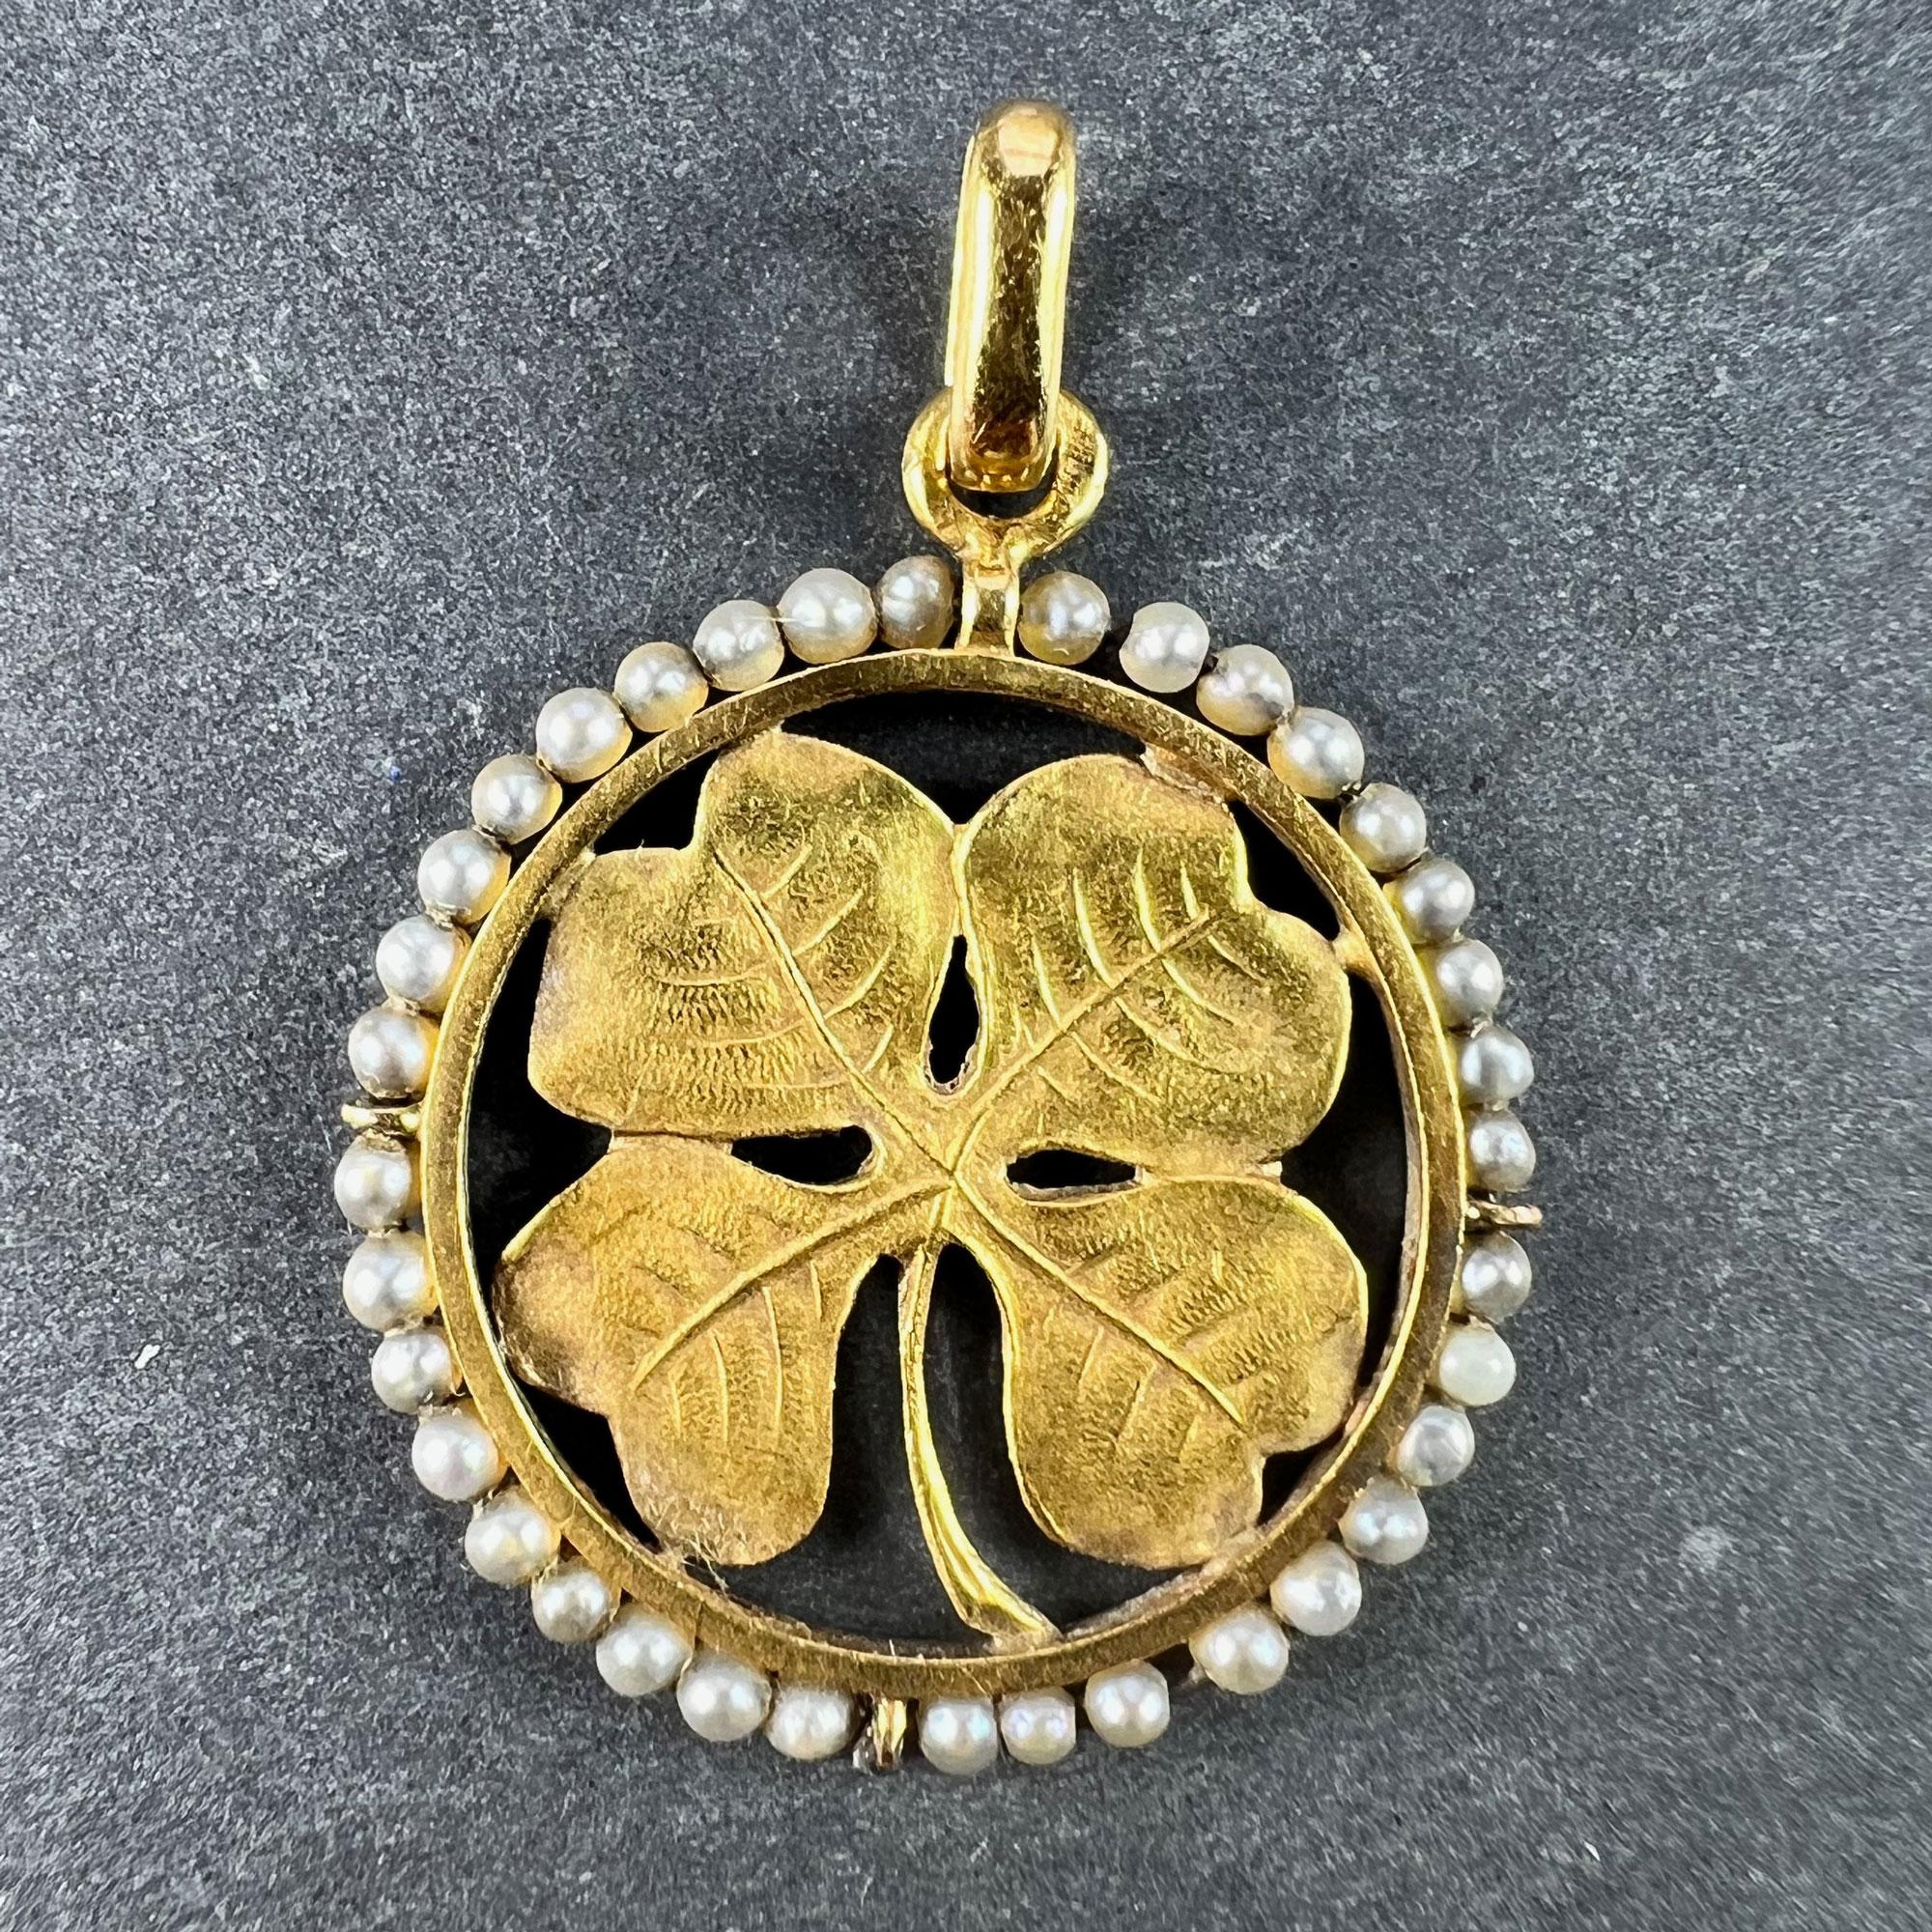 A French 18 karat (18K) yellow gold charm pendant designed as a four-leaf clover or lucky shamrock with finely detailed naturalistic leaves, within a circular frame outlined by 36 natural seed pearls. Stamped with the eagle’s head for French